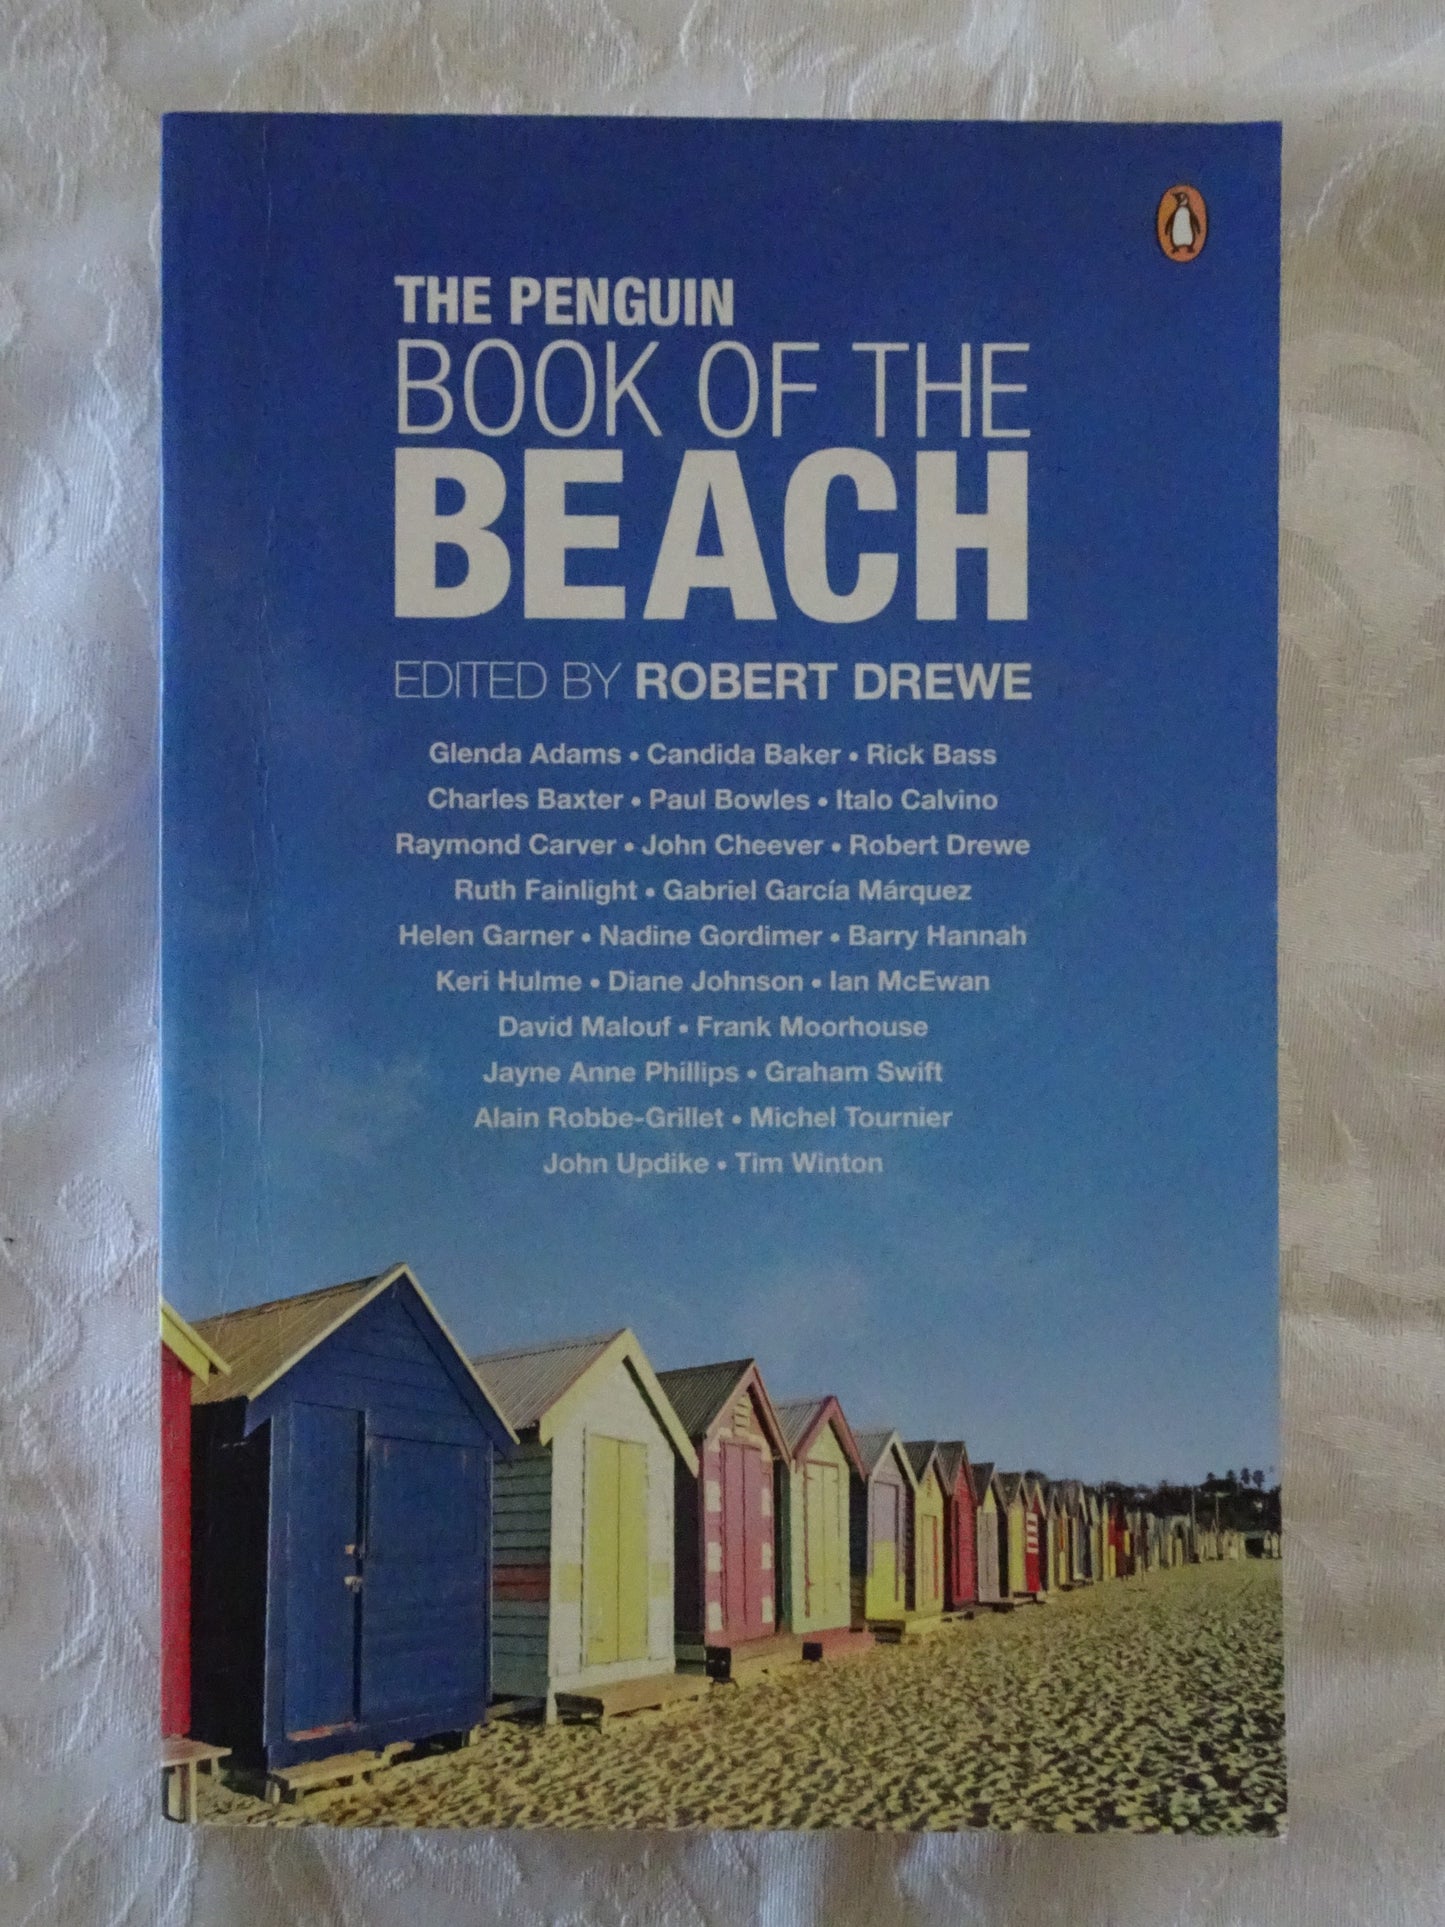 The Penguin Book of the Beach by Robert Drewe